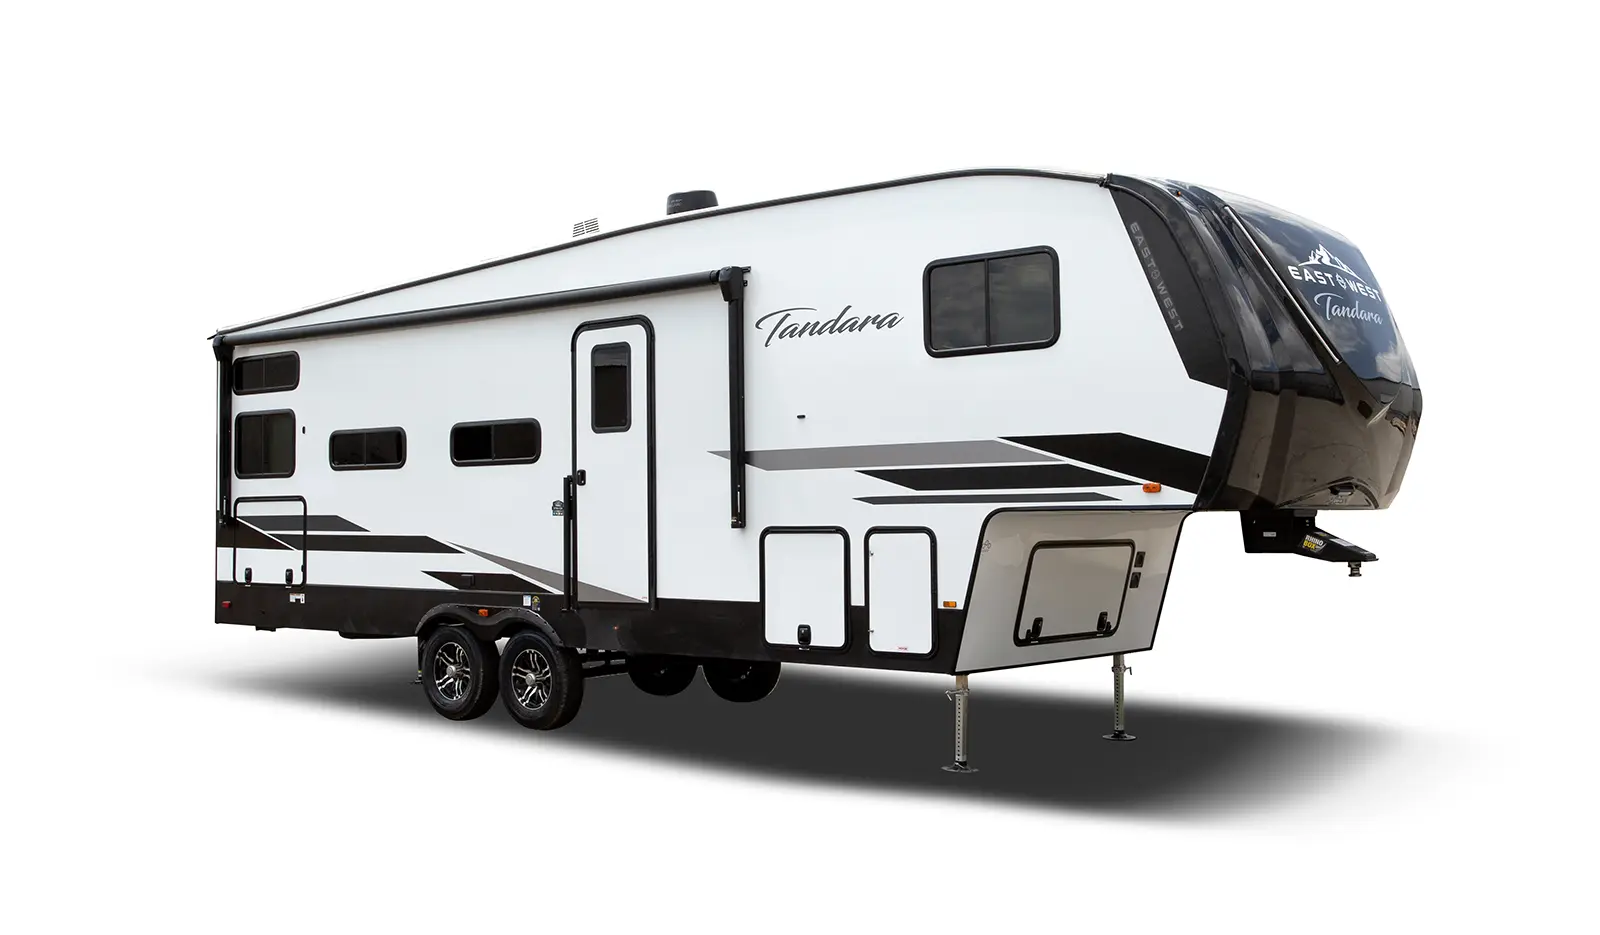 Tandara Fifth Wheels - East to West